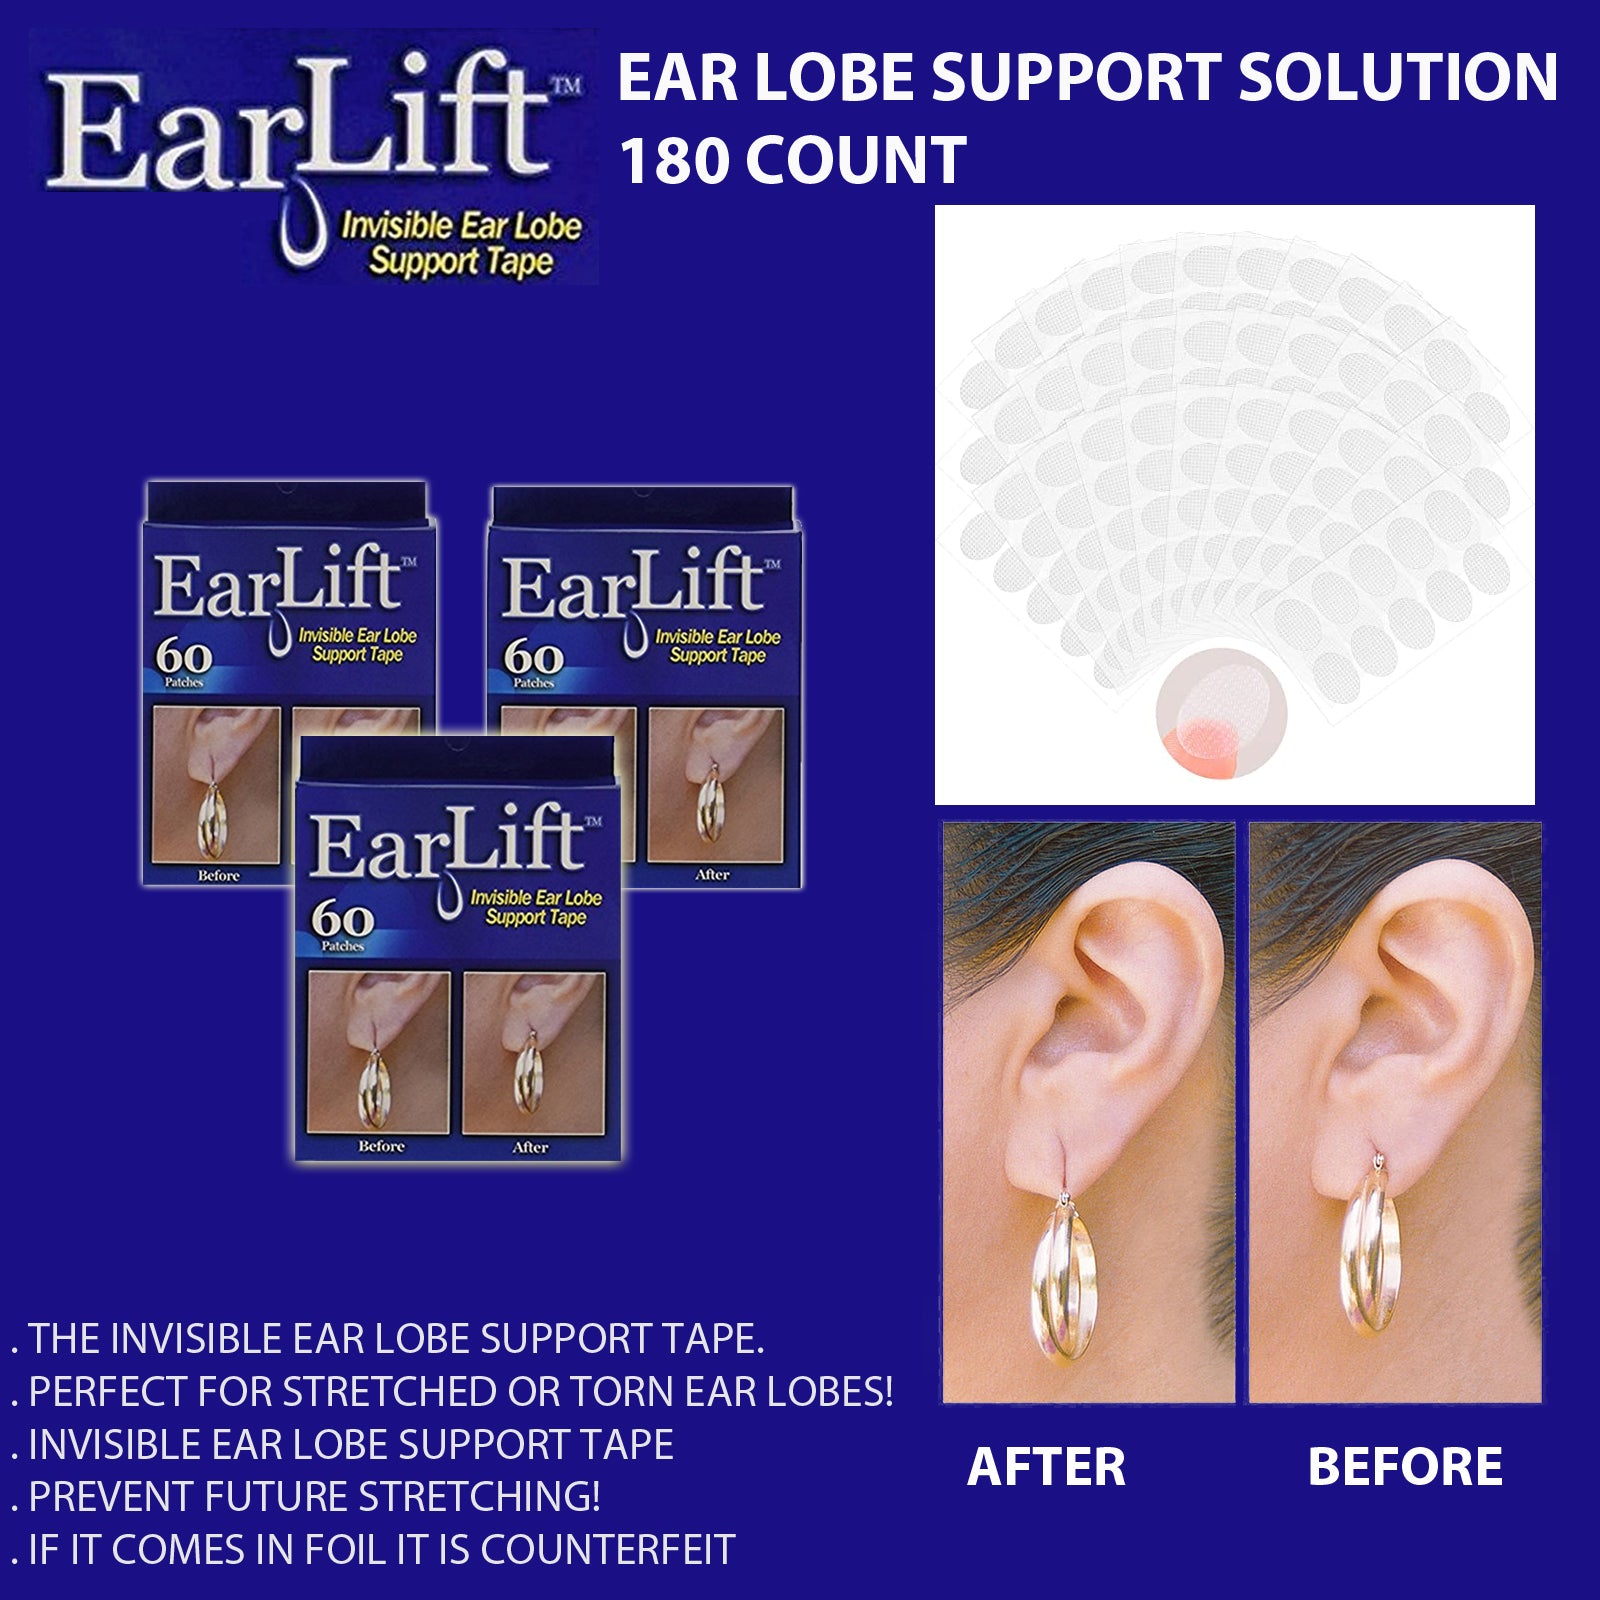 Earlift Invisible Ear Lobe Support Solution Relieve Strain